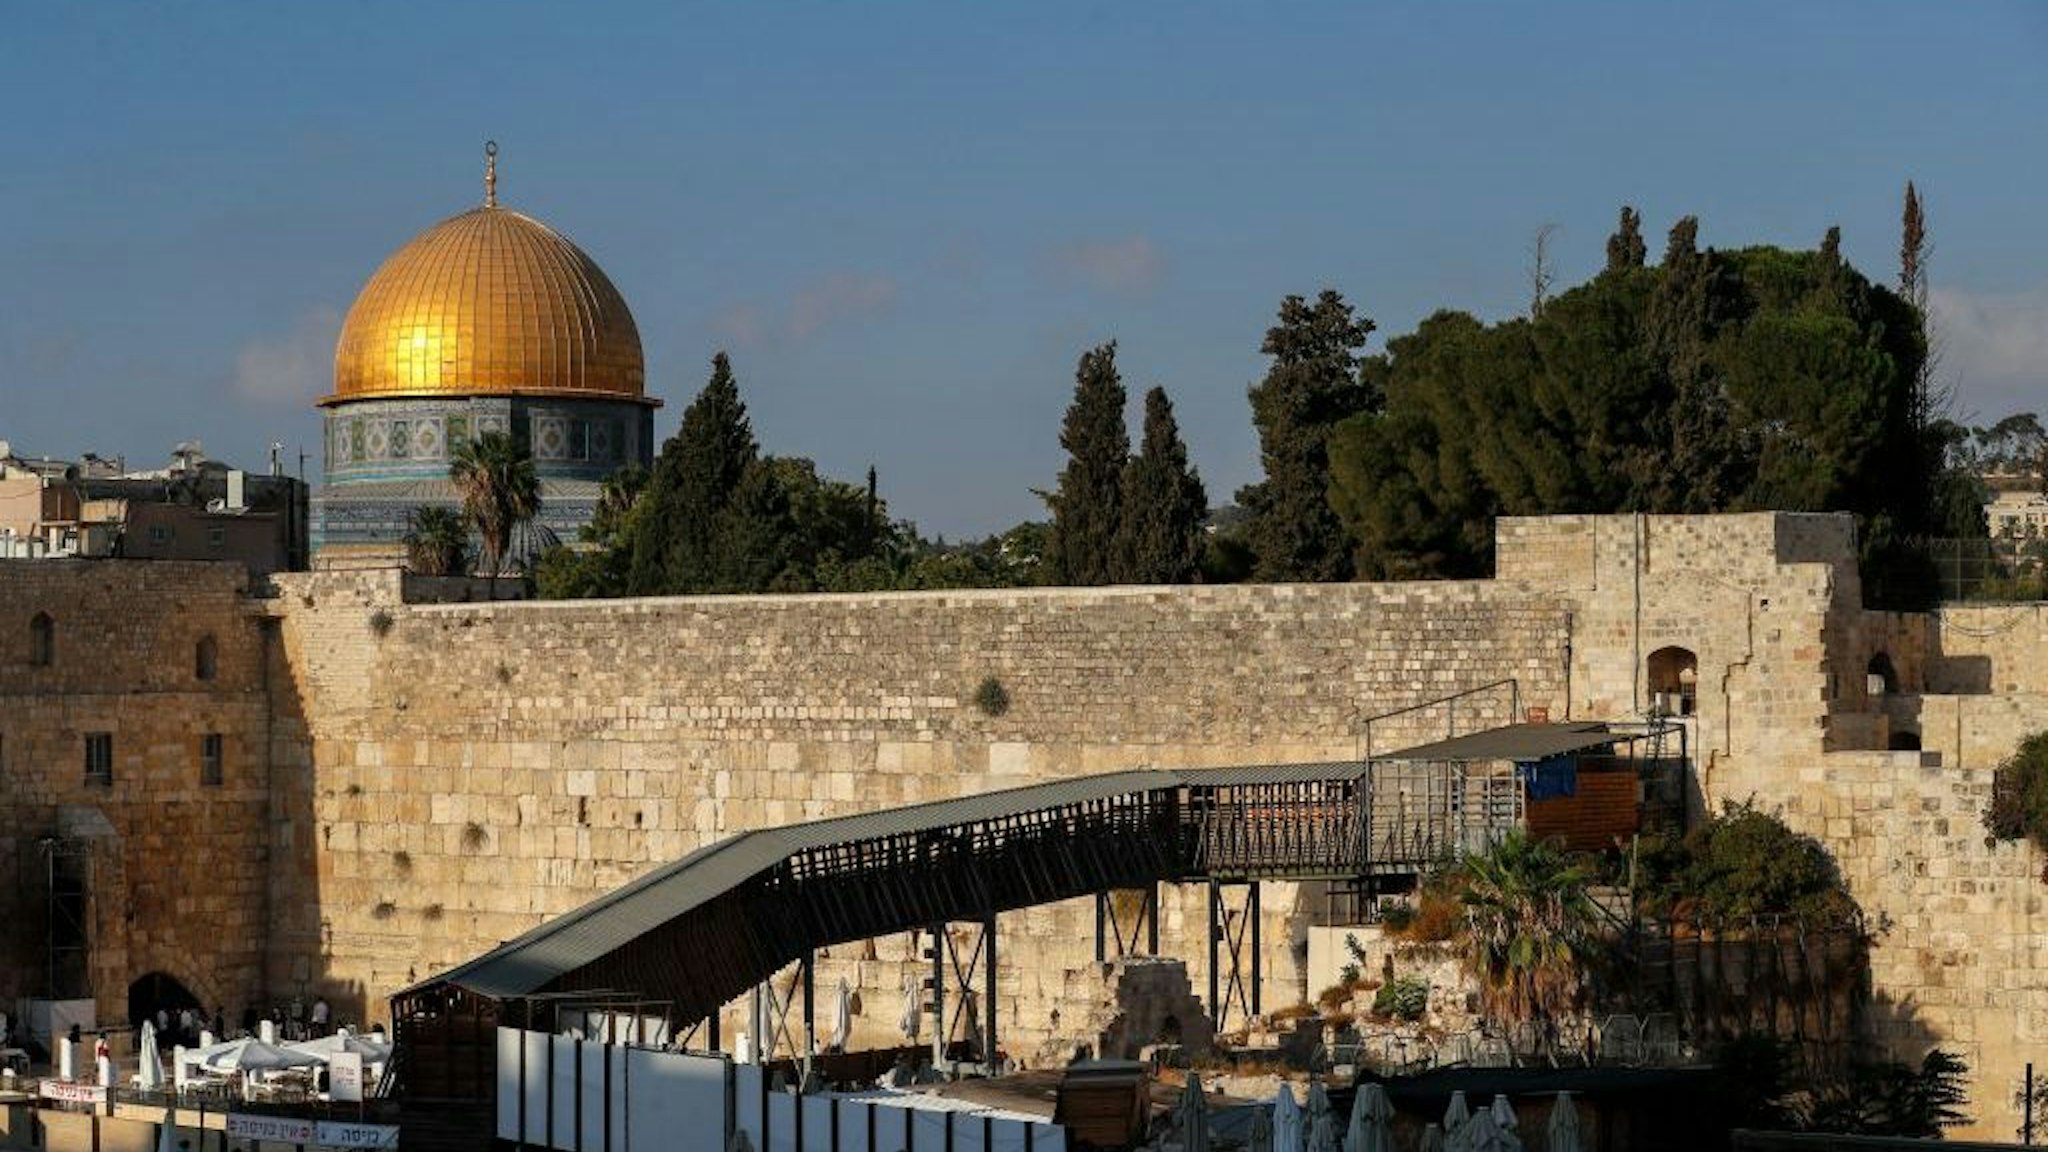 This picture shows the Mughrabi ramp, leading from the Western Wall (Wailing Wall) to the Al-Aqsa Mosque compound that includes the Dome of the Rock Mosque (background) in Jerusalem's Old City, on September 10, 2021. (Photo by AHMAD GHARABLI / AFP) (Photo by AHMAD GHARABLI/AFP via Getty Images)